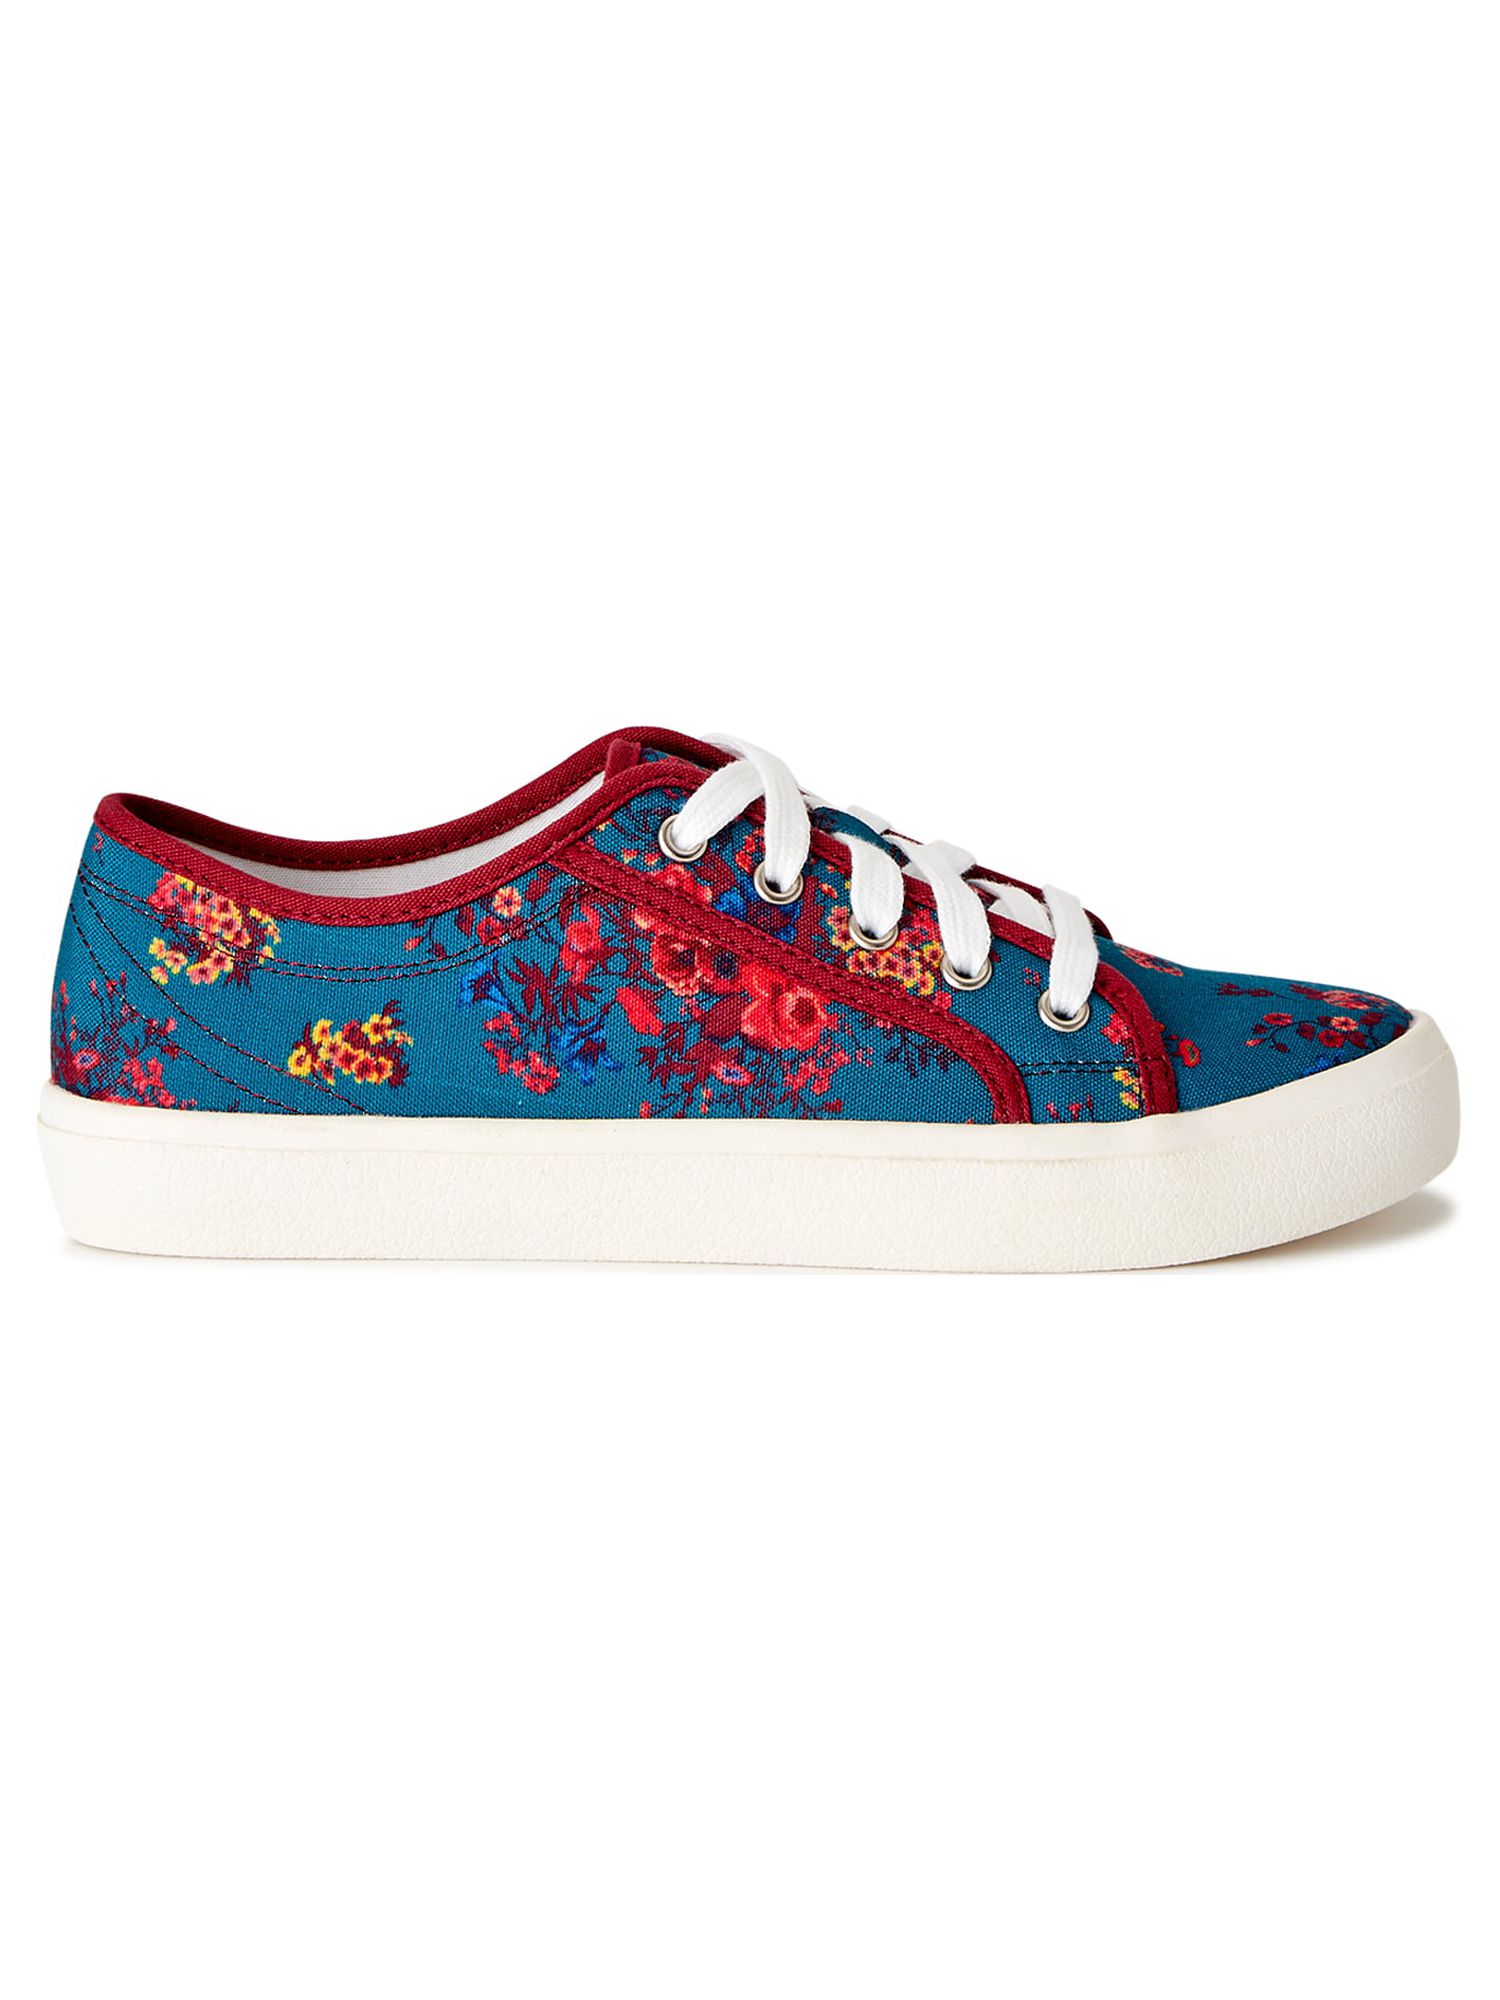 The Pioneer Woman Floral Sneakers, Women's - image 3 of 6